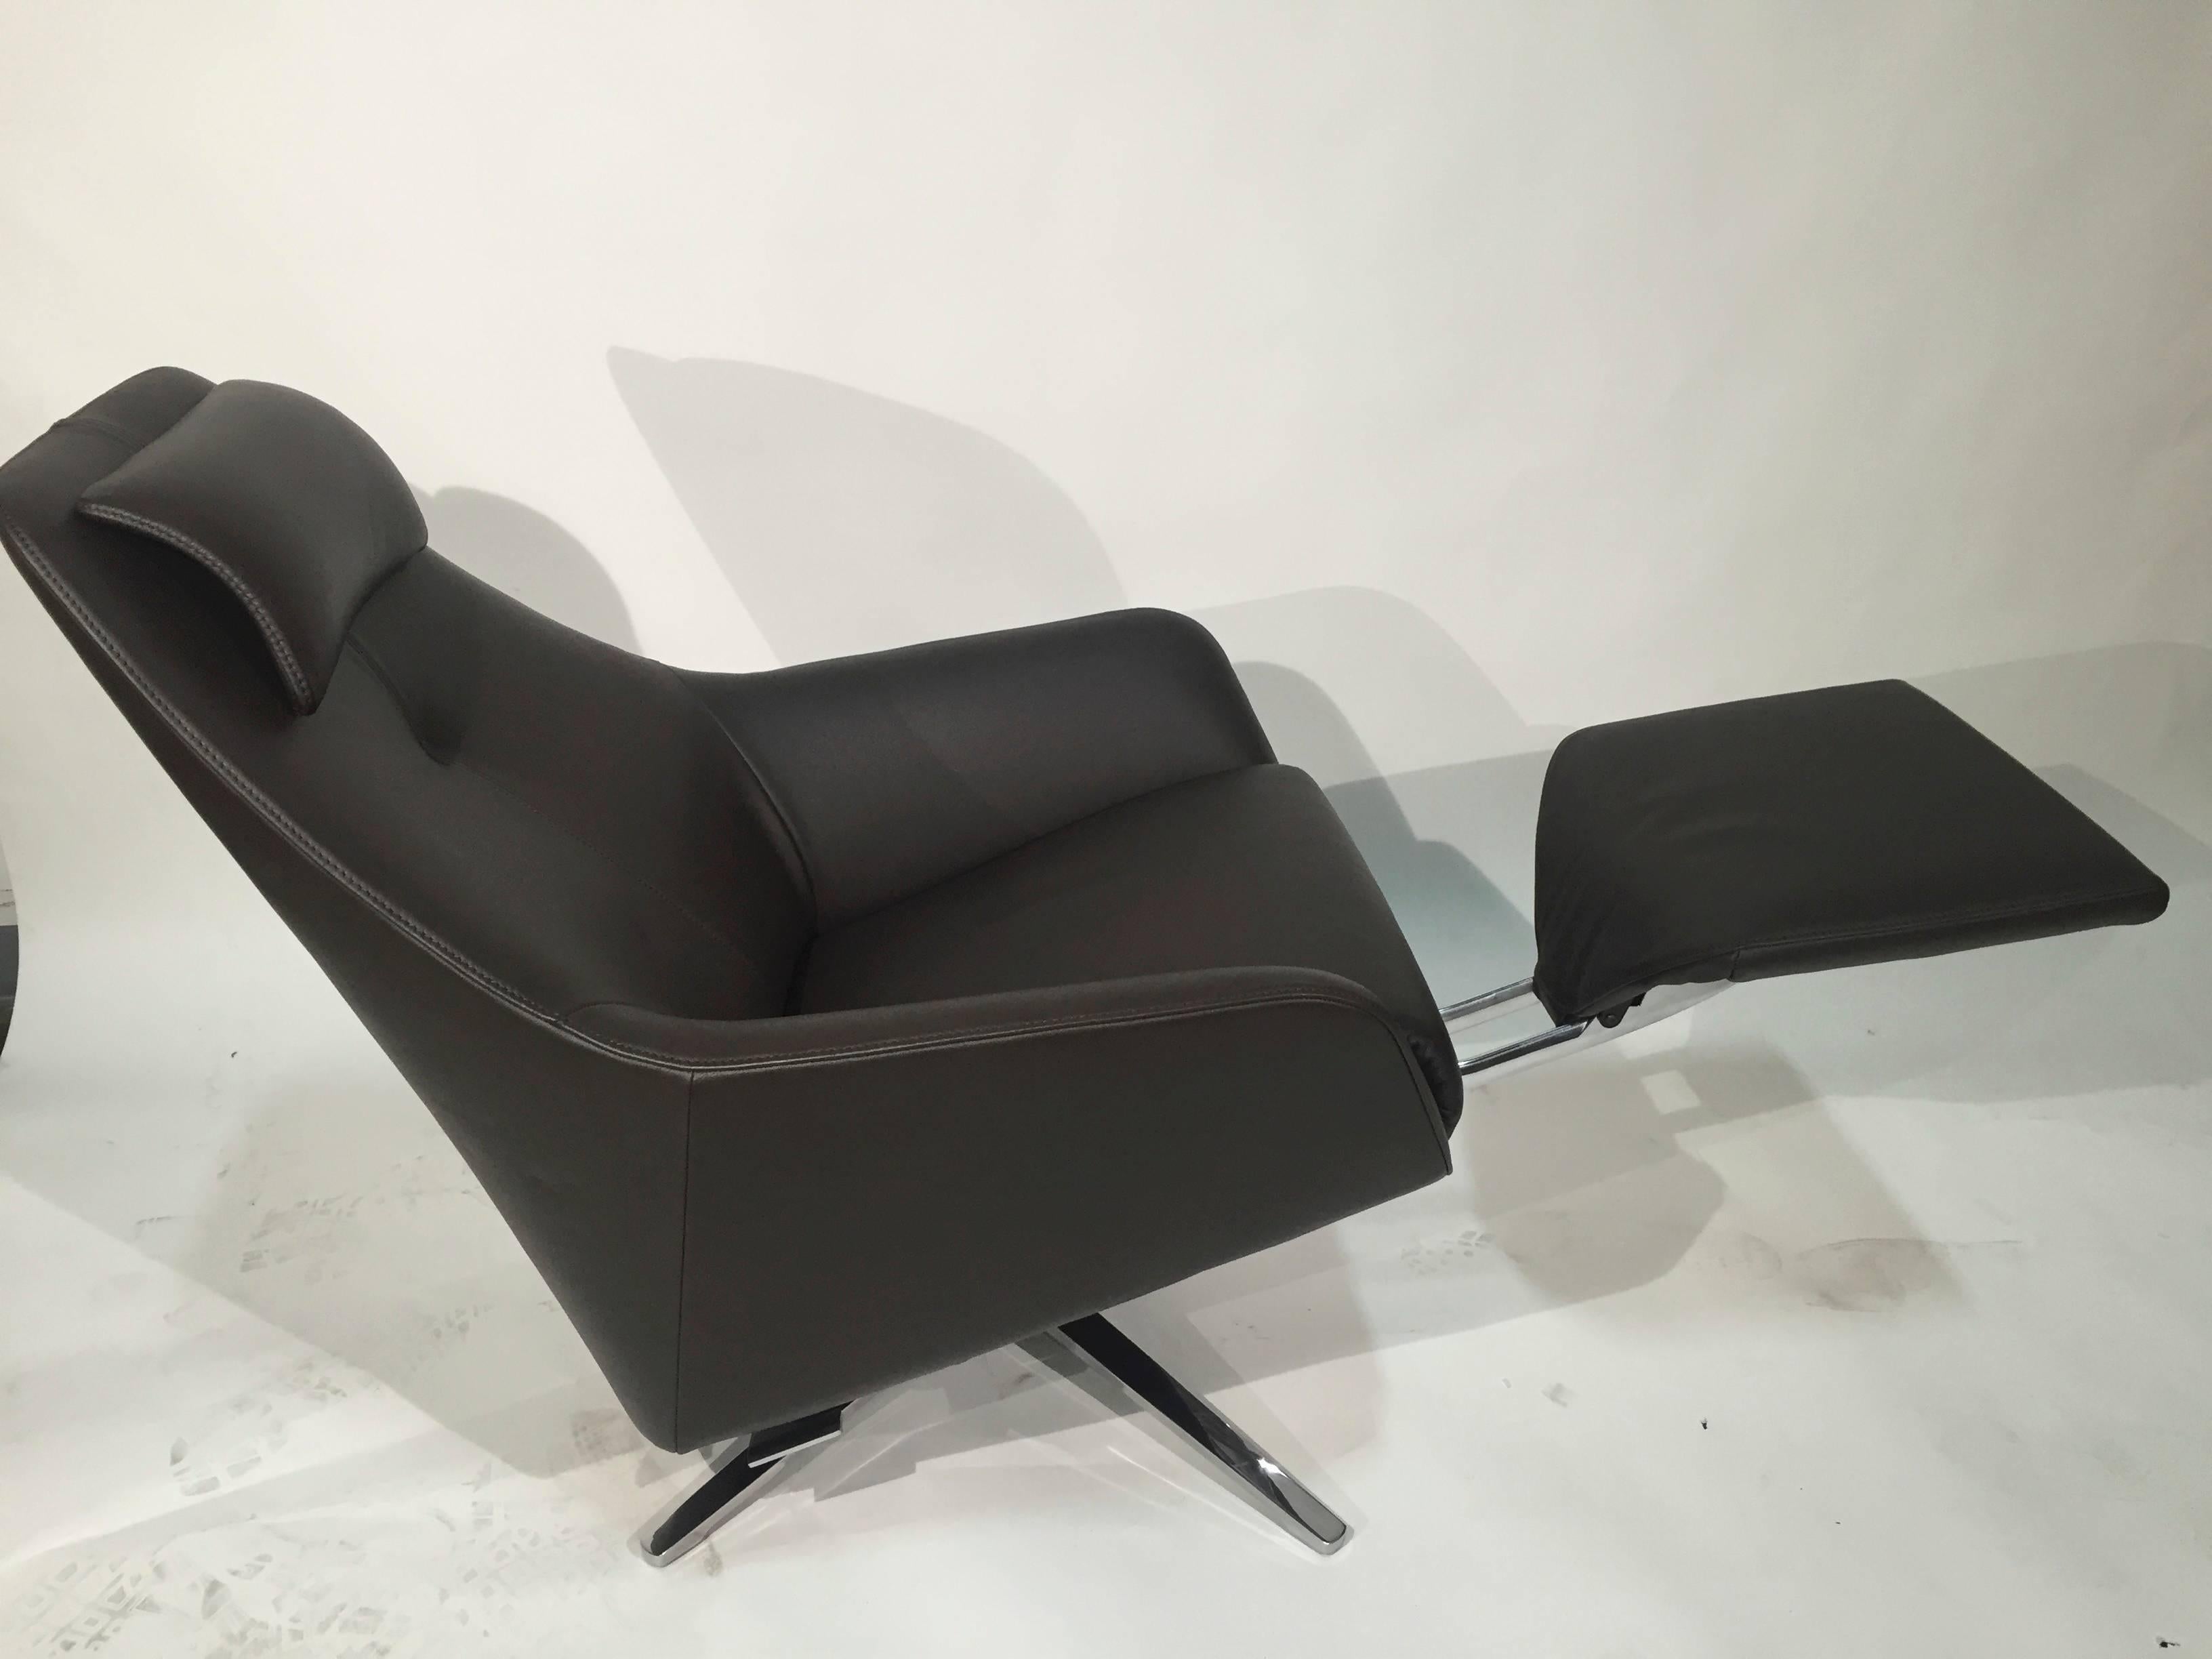 Swiss De Sede DS-277 Armchair with Footrest in Black Upholstery by Christian Werner For Sale